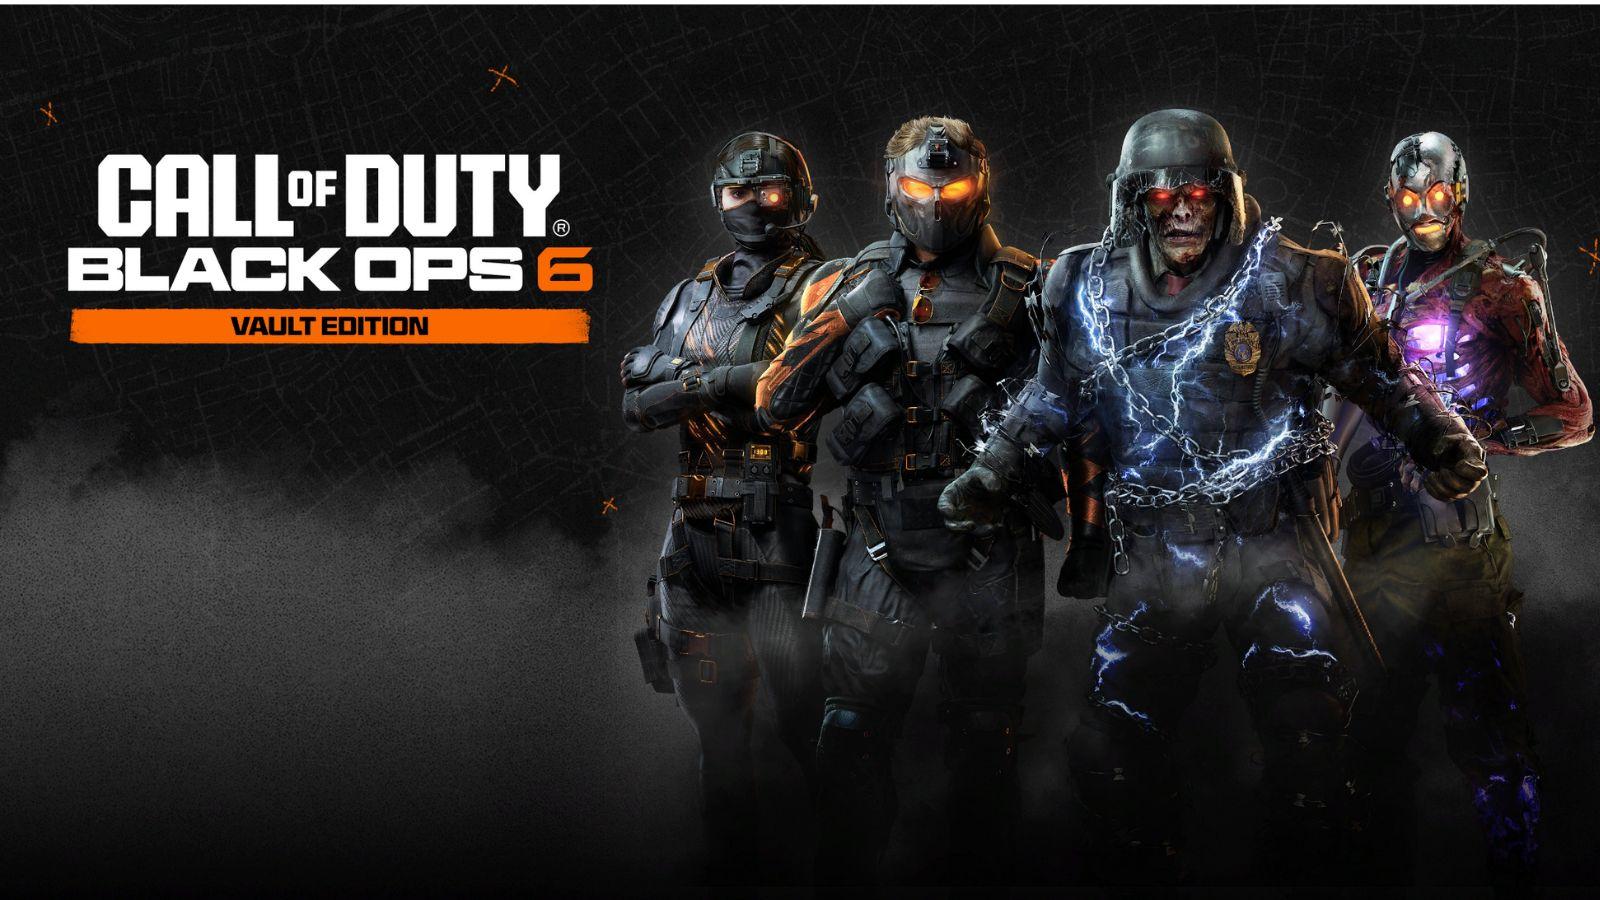 Black Ops 6 editions image